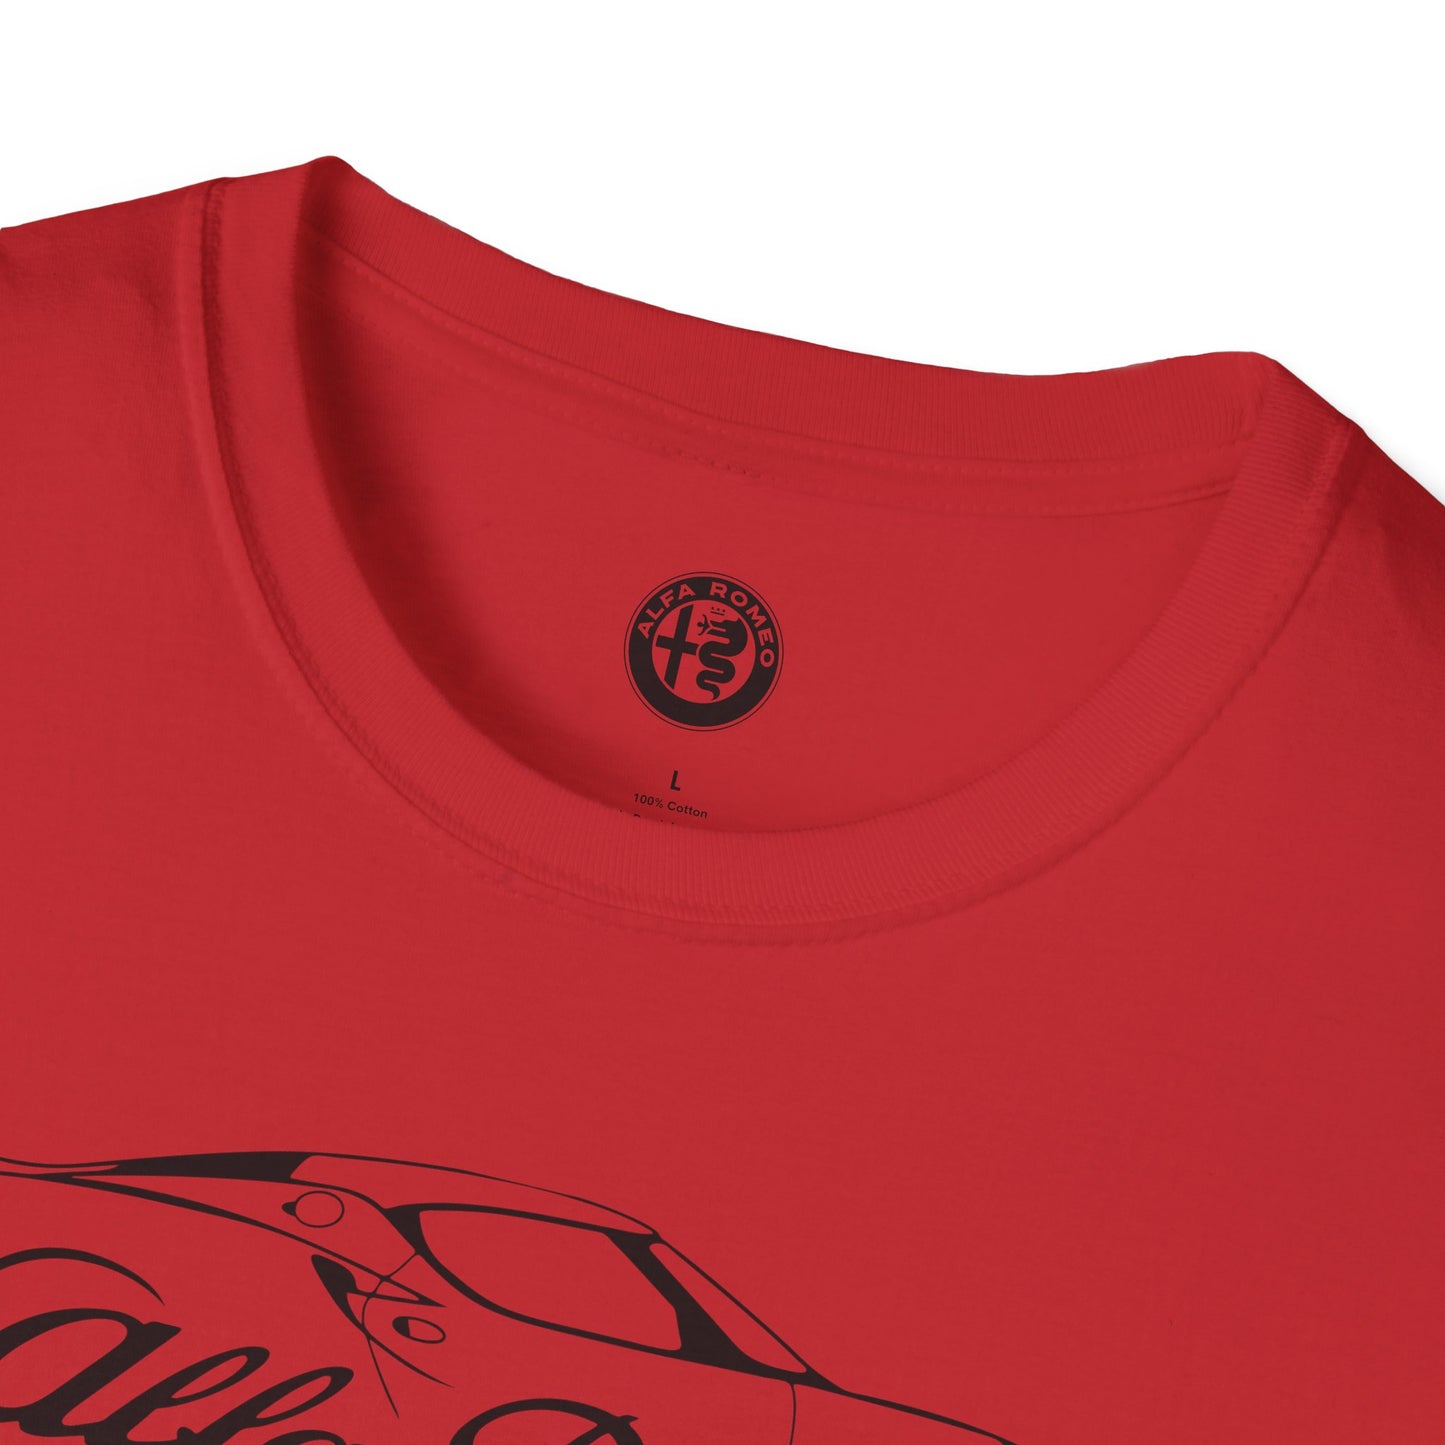 Alfa Romeo 4C Silhouette T-Shirt - Unisex Softstyle by Gildan - 100% Cotton Comfort - Casual & Stylish - Perfect for 4C Owners